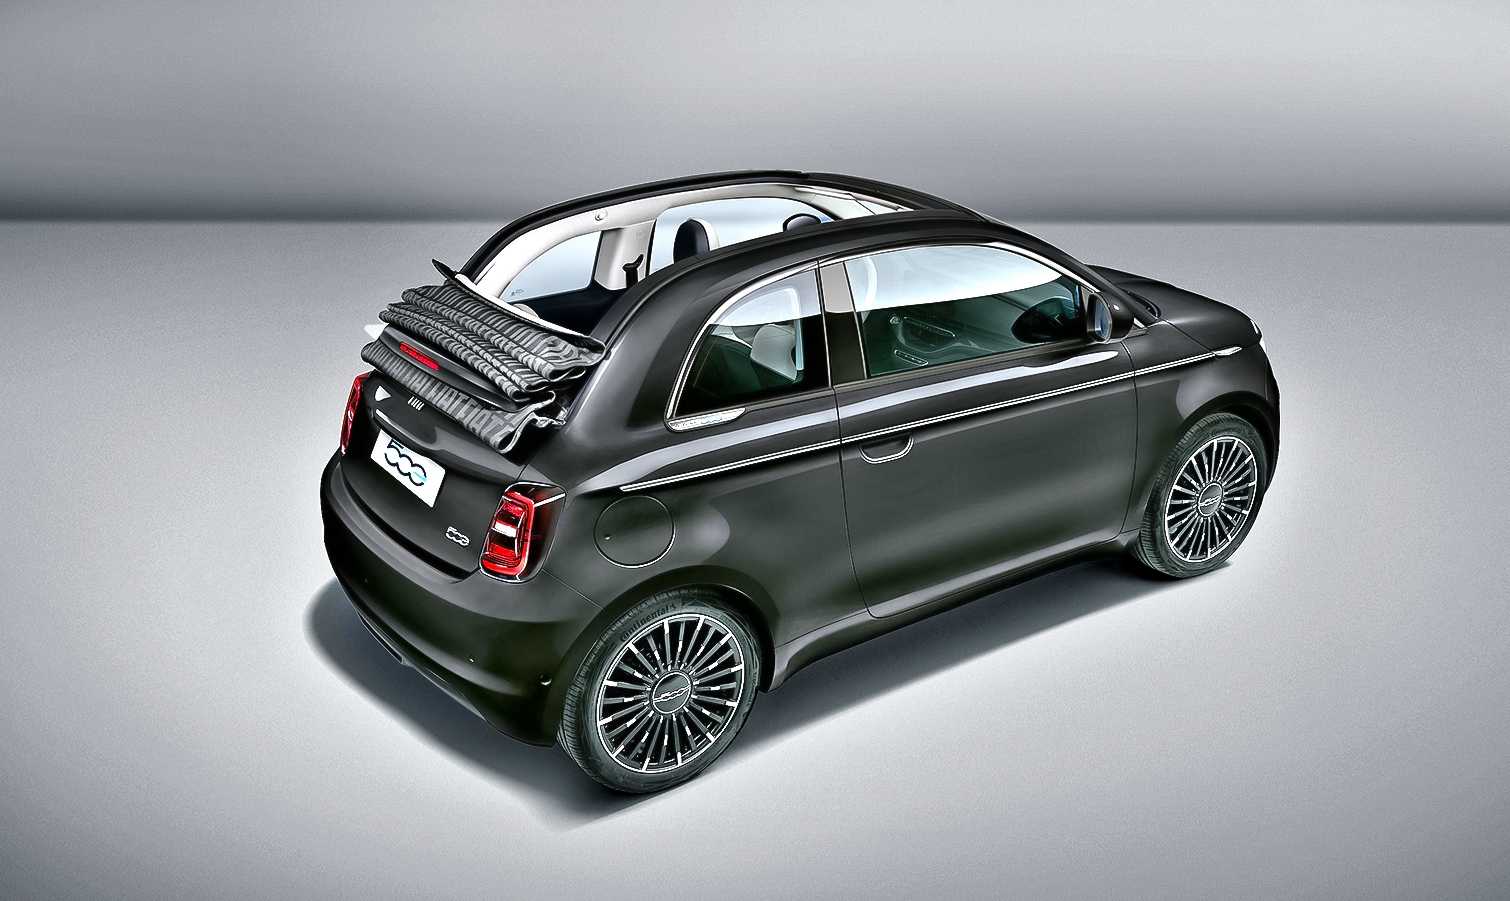 New Fiat 500 La Prima by Bocelli with open roof, top-rear view